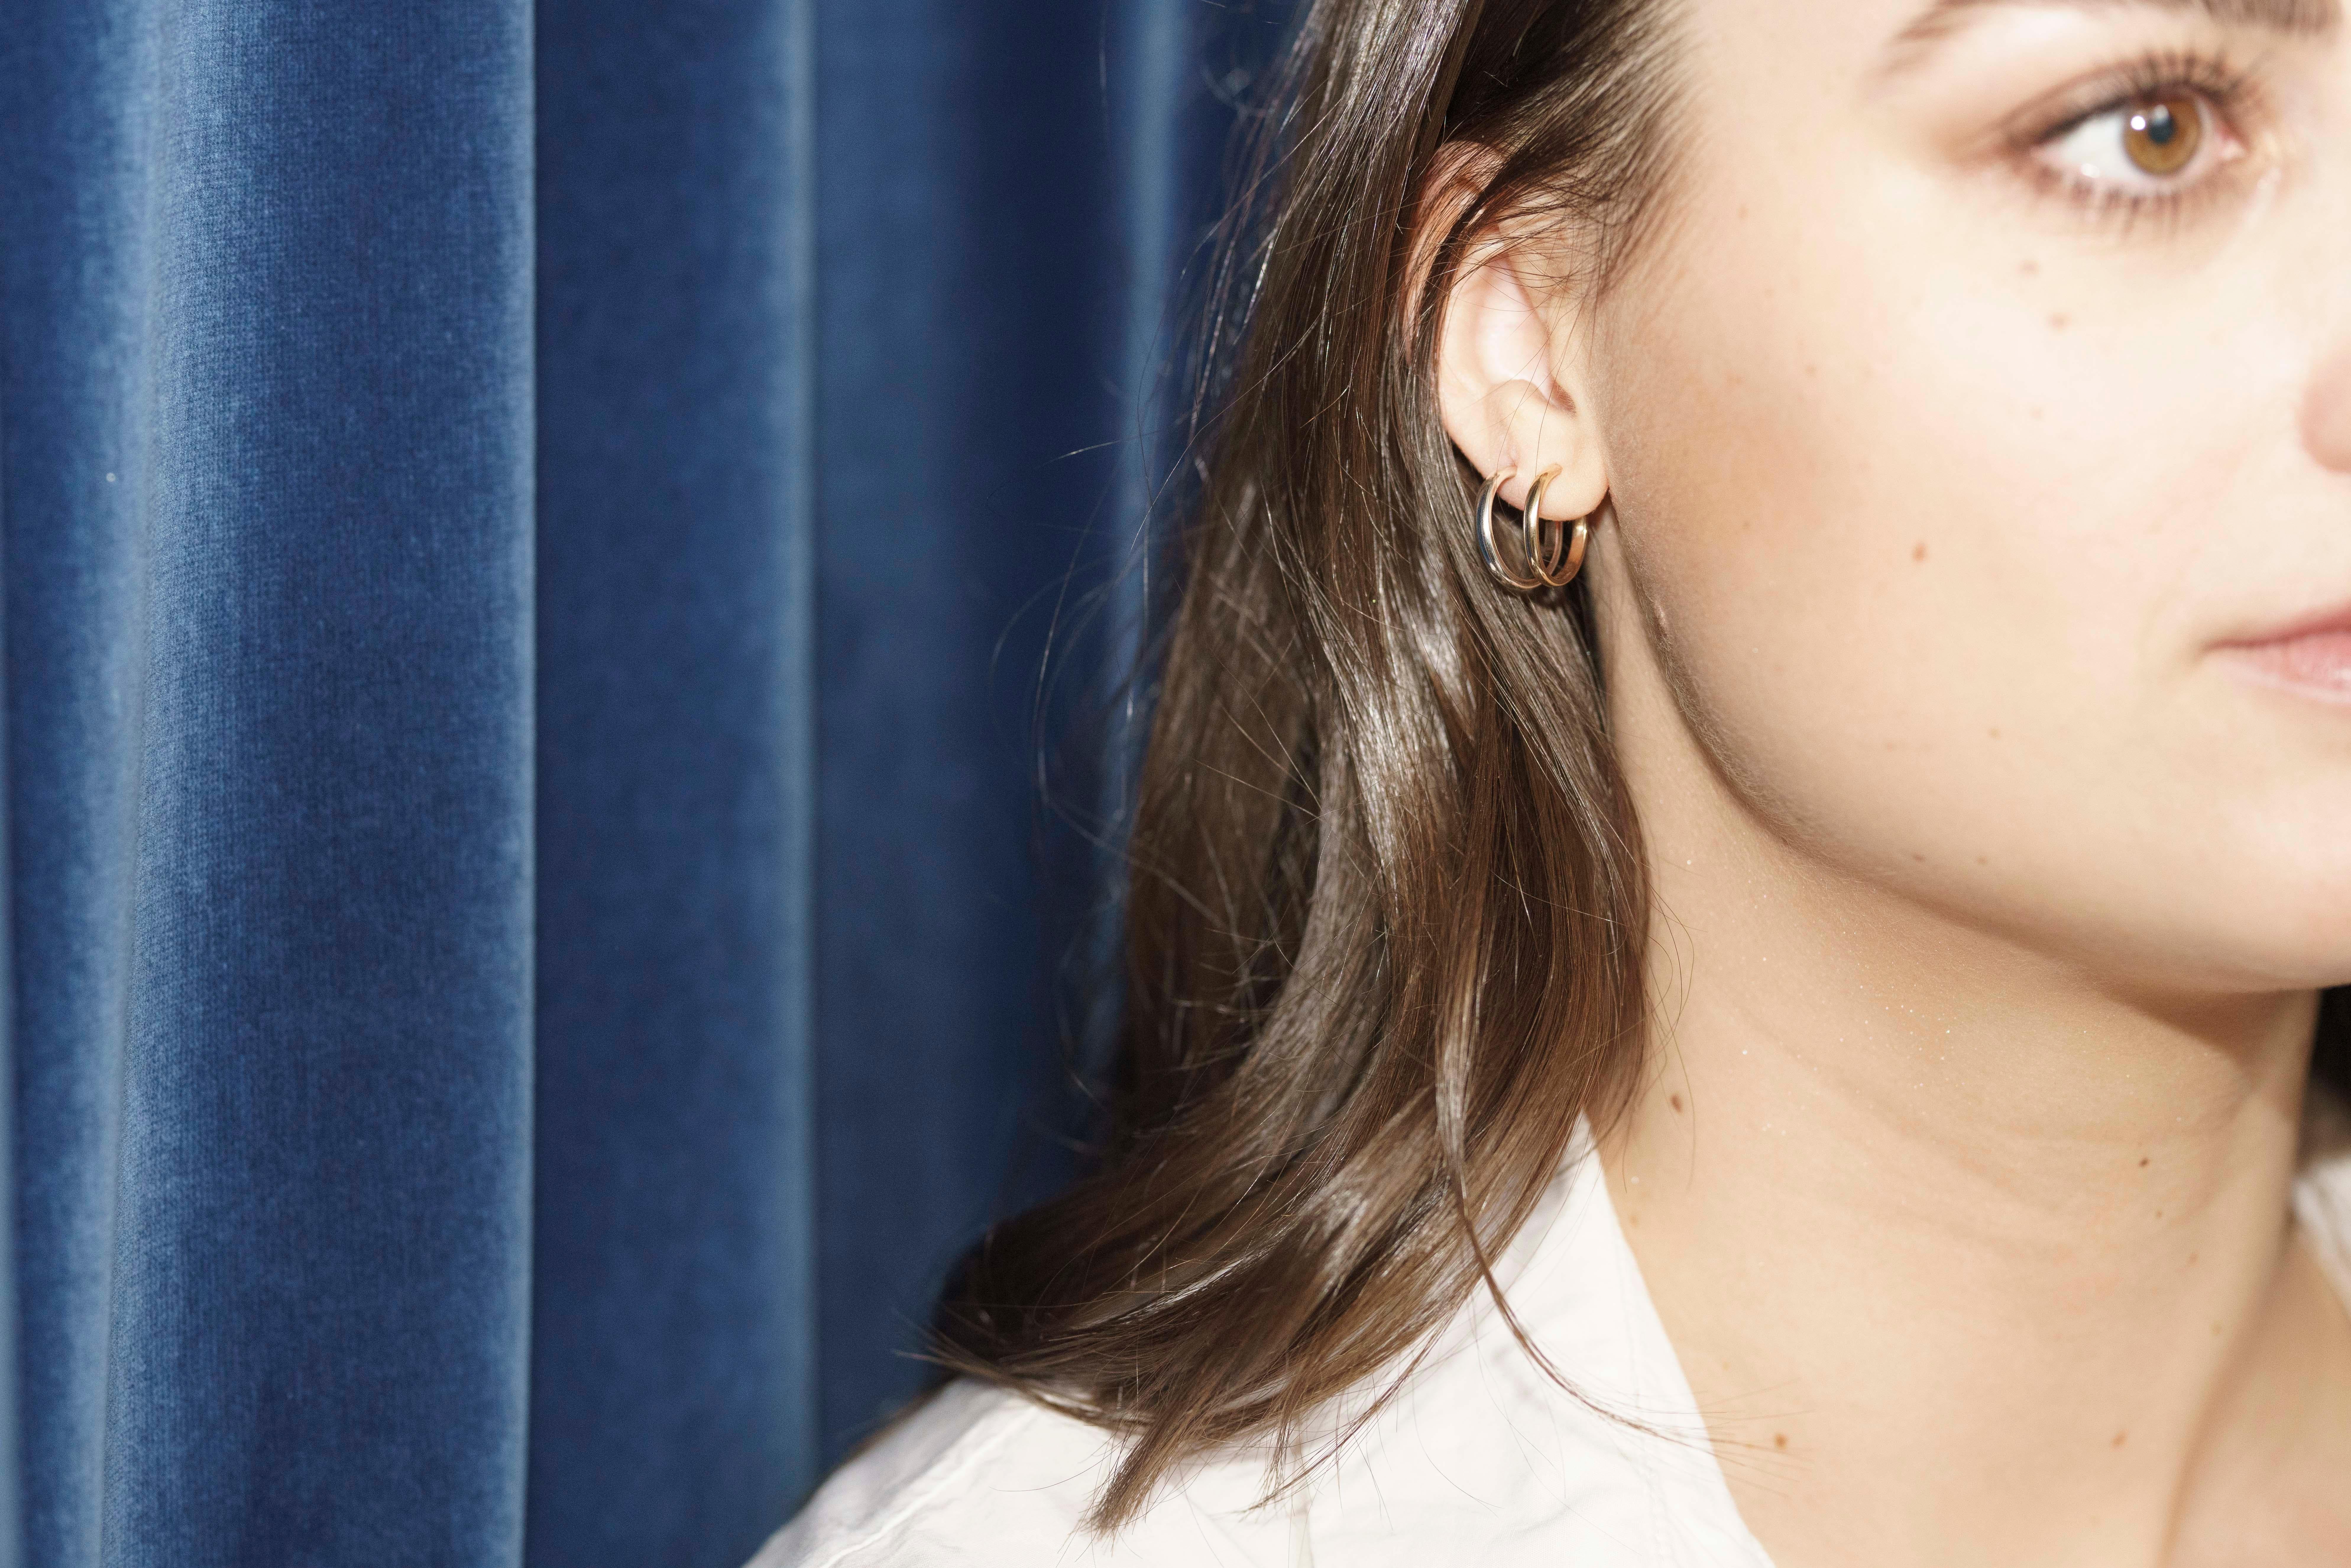 Classic hoop earrings, that are simple in design and lightweight, making these hoops suitable for all day and night wearing.

Handmade to order in our North London studio and hallmarked by the London Assay Office.

Details:
Colour: Gold
Composition: